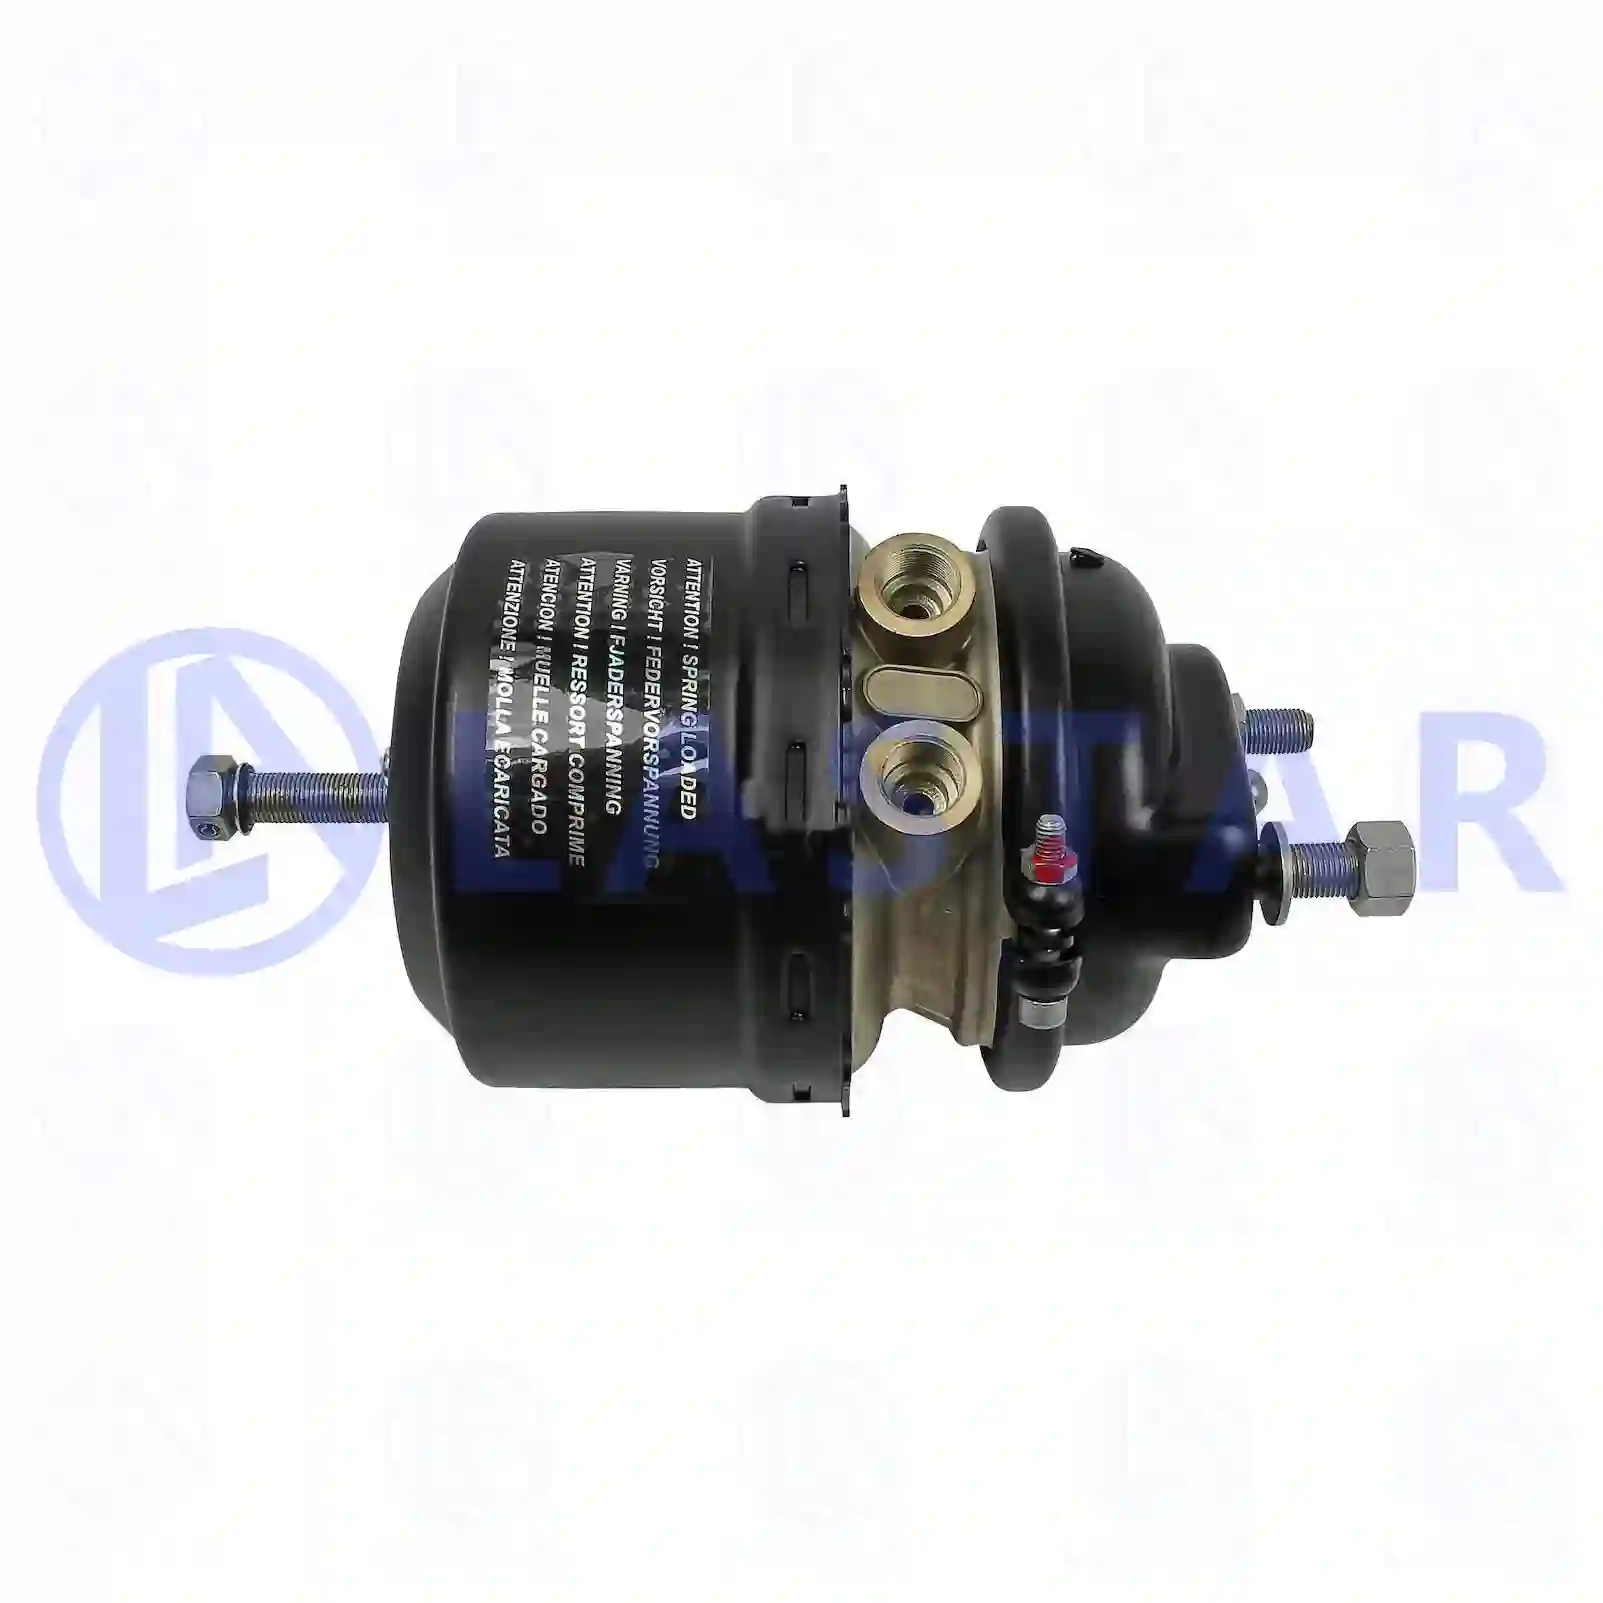 Spring brake cylinder, right, 77715242, 0184206318, 0184206518, 0204204018, , ||  77715242 Lastar Spare Part | Truck Spare Parts, Auotomotive Spare Parts Spring brake cylinder, right, 77715242, 0184206318, 0184206518, 0204204018, , ||  77715242 Lastar Spare Part | Truck Spare Parts, Auotomotive Spare Parts